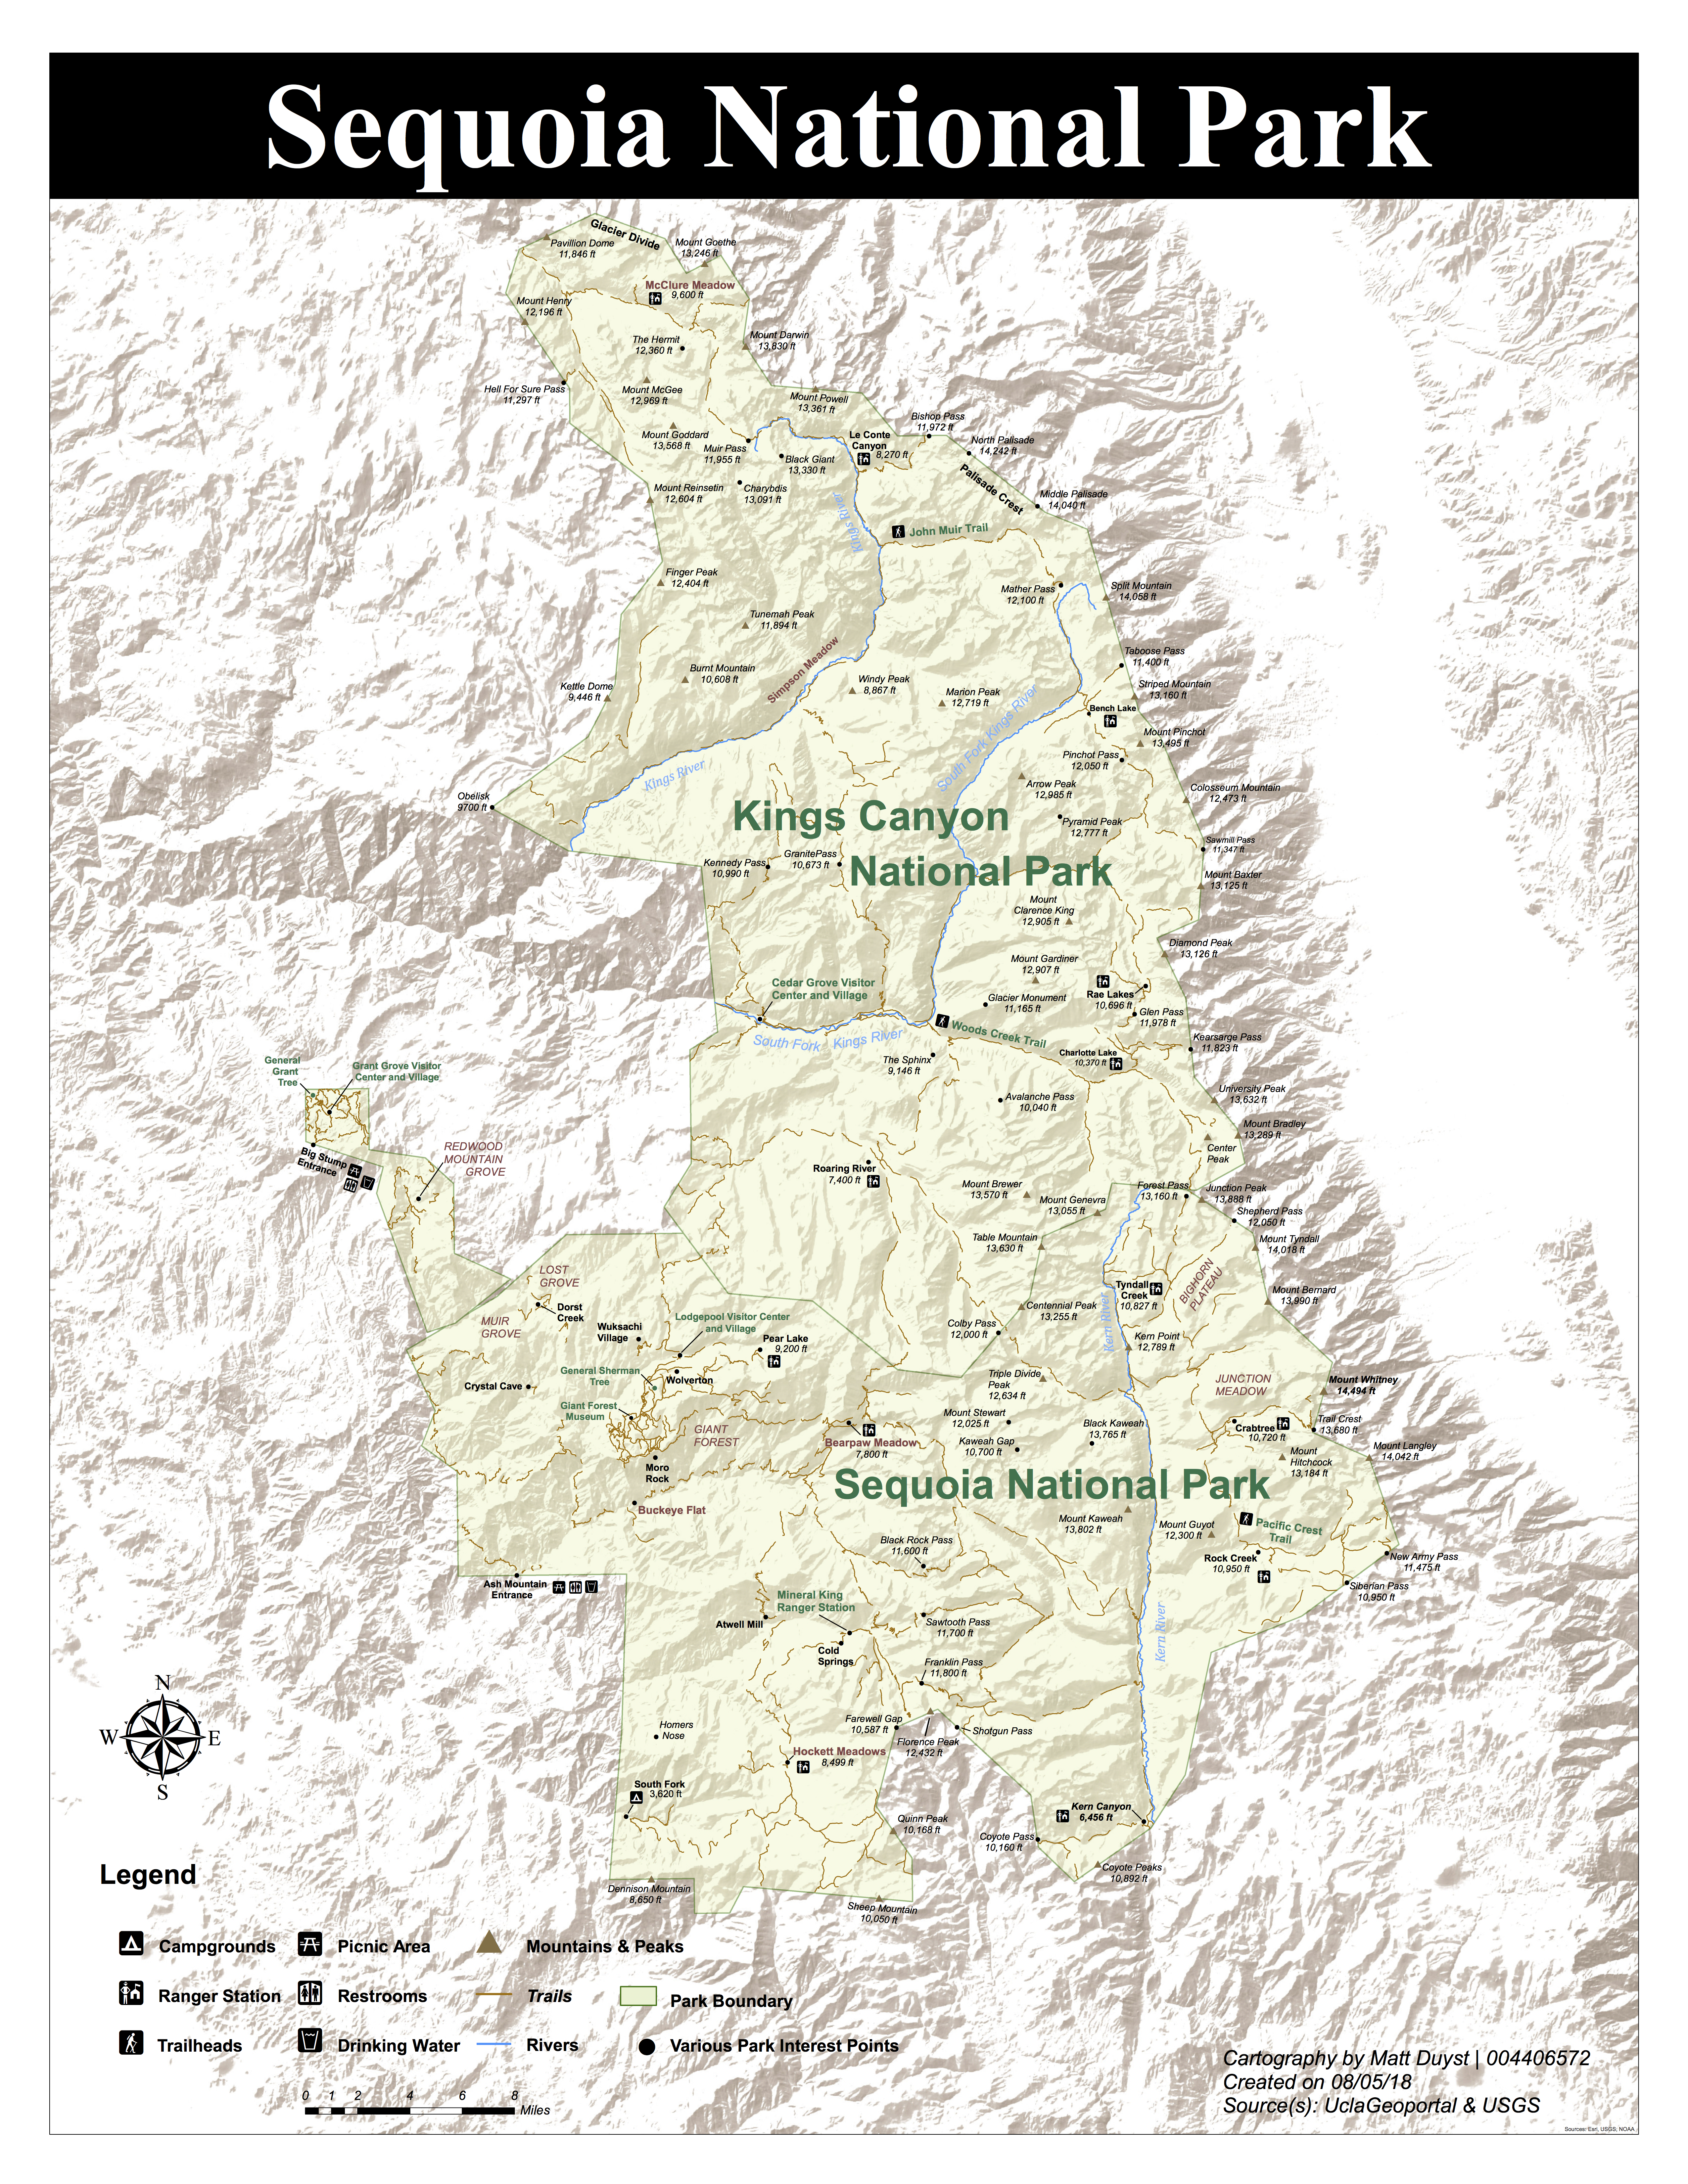 A New Design for Sequoia National Park: The Ideal Cartographic Relief Map